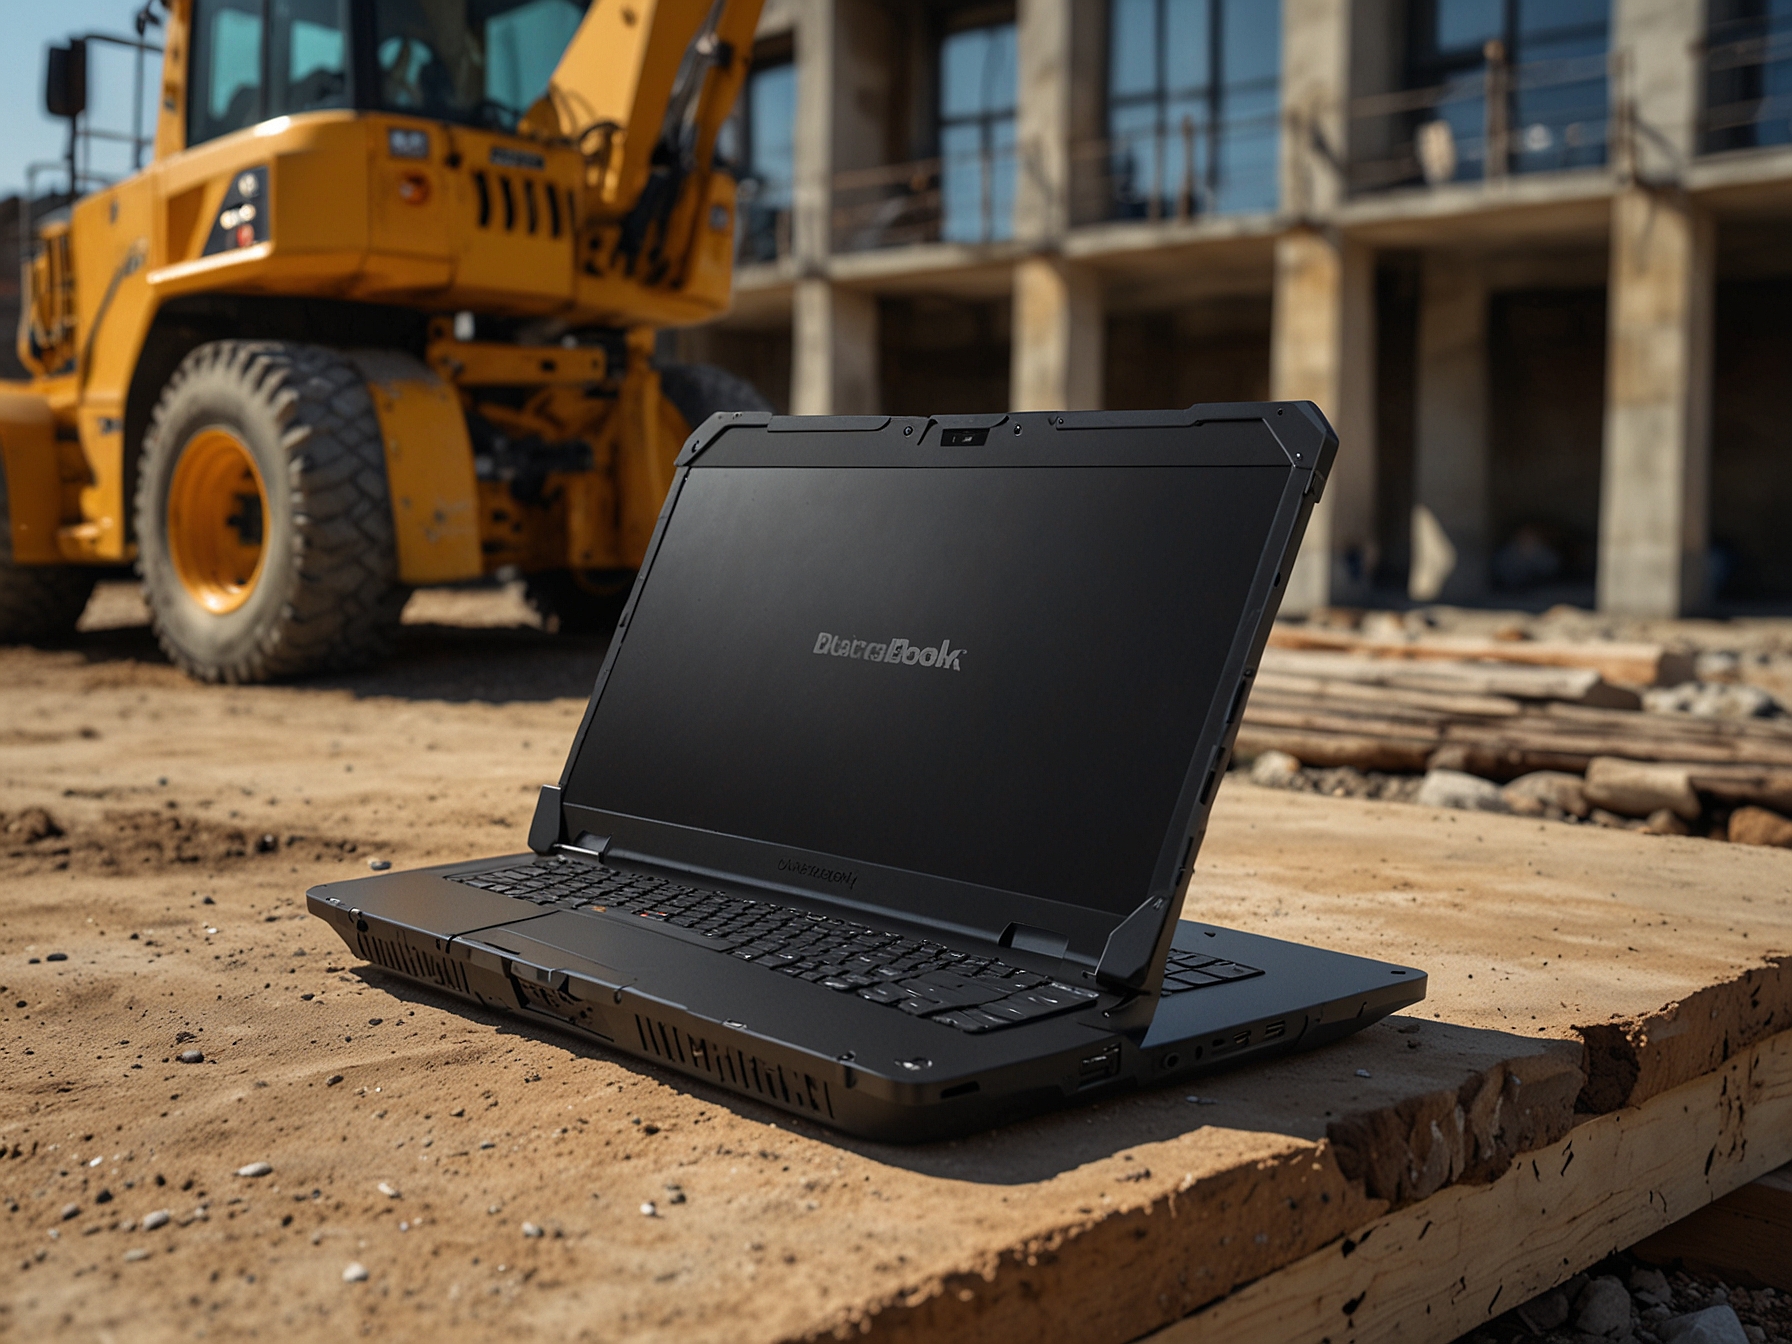 The new Durabook S15 rugged laptop, featuring a sleek design and lightweight build, sits on a construction site table, showcasing its 1000-nit IPS display clearly visible under bright sunlight.